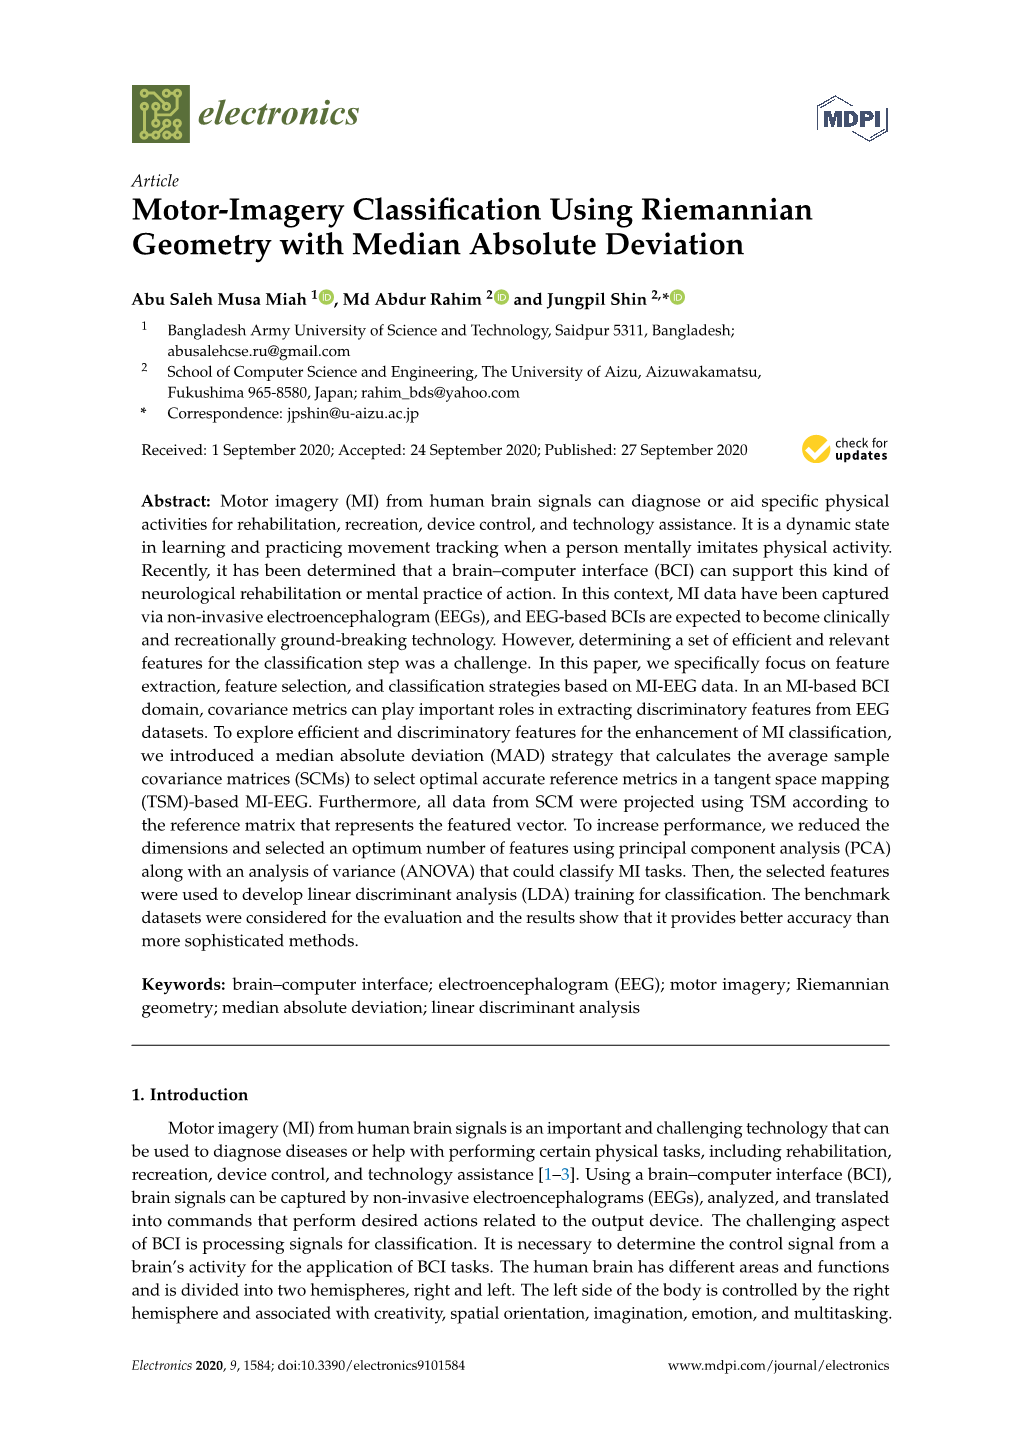 Motor-Imagery Classification Using Riemannian Geometry with Median